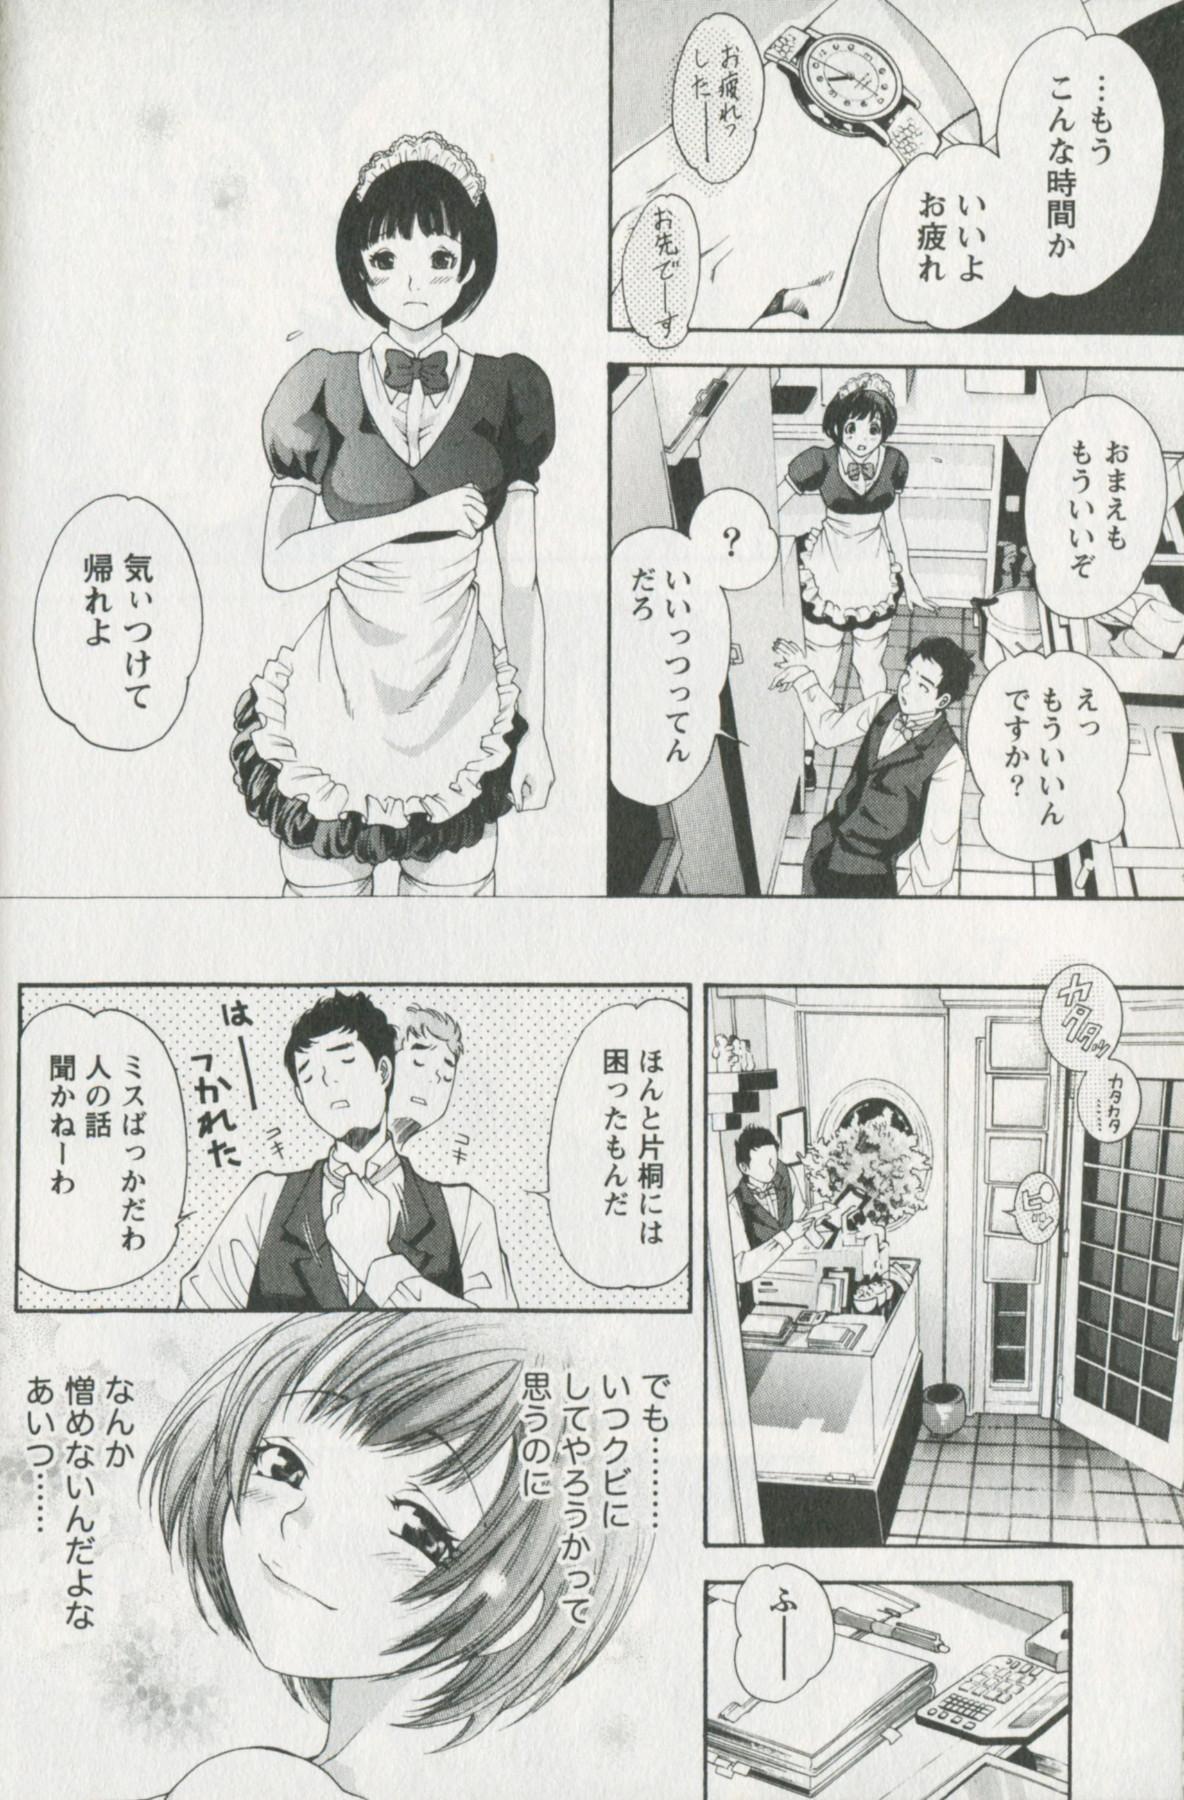 Jisho to Skirt - She Put Down the Dictionary, then Took off her Skirt. 157